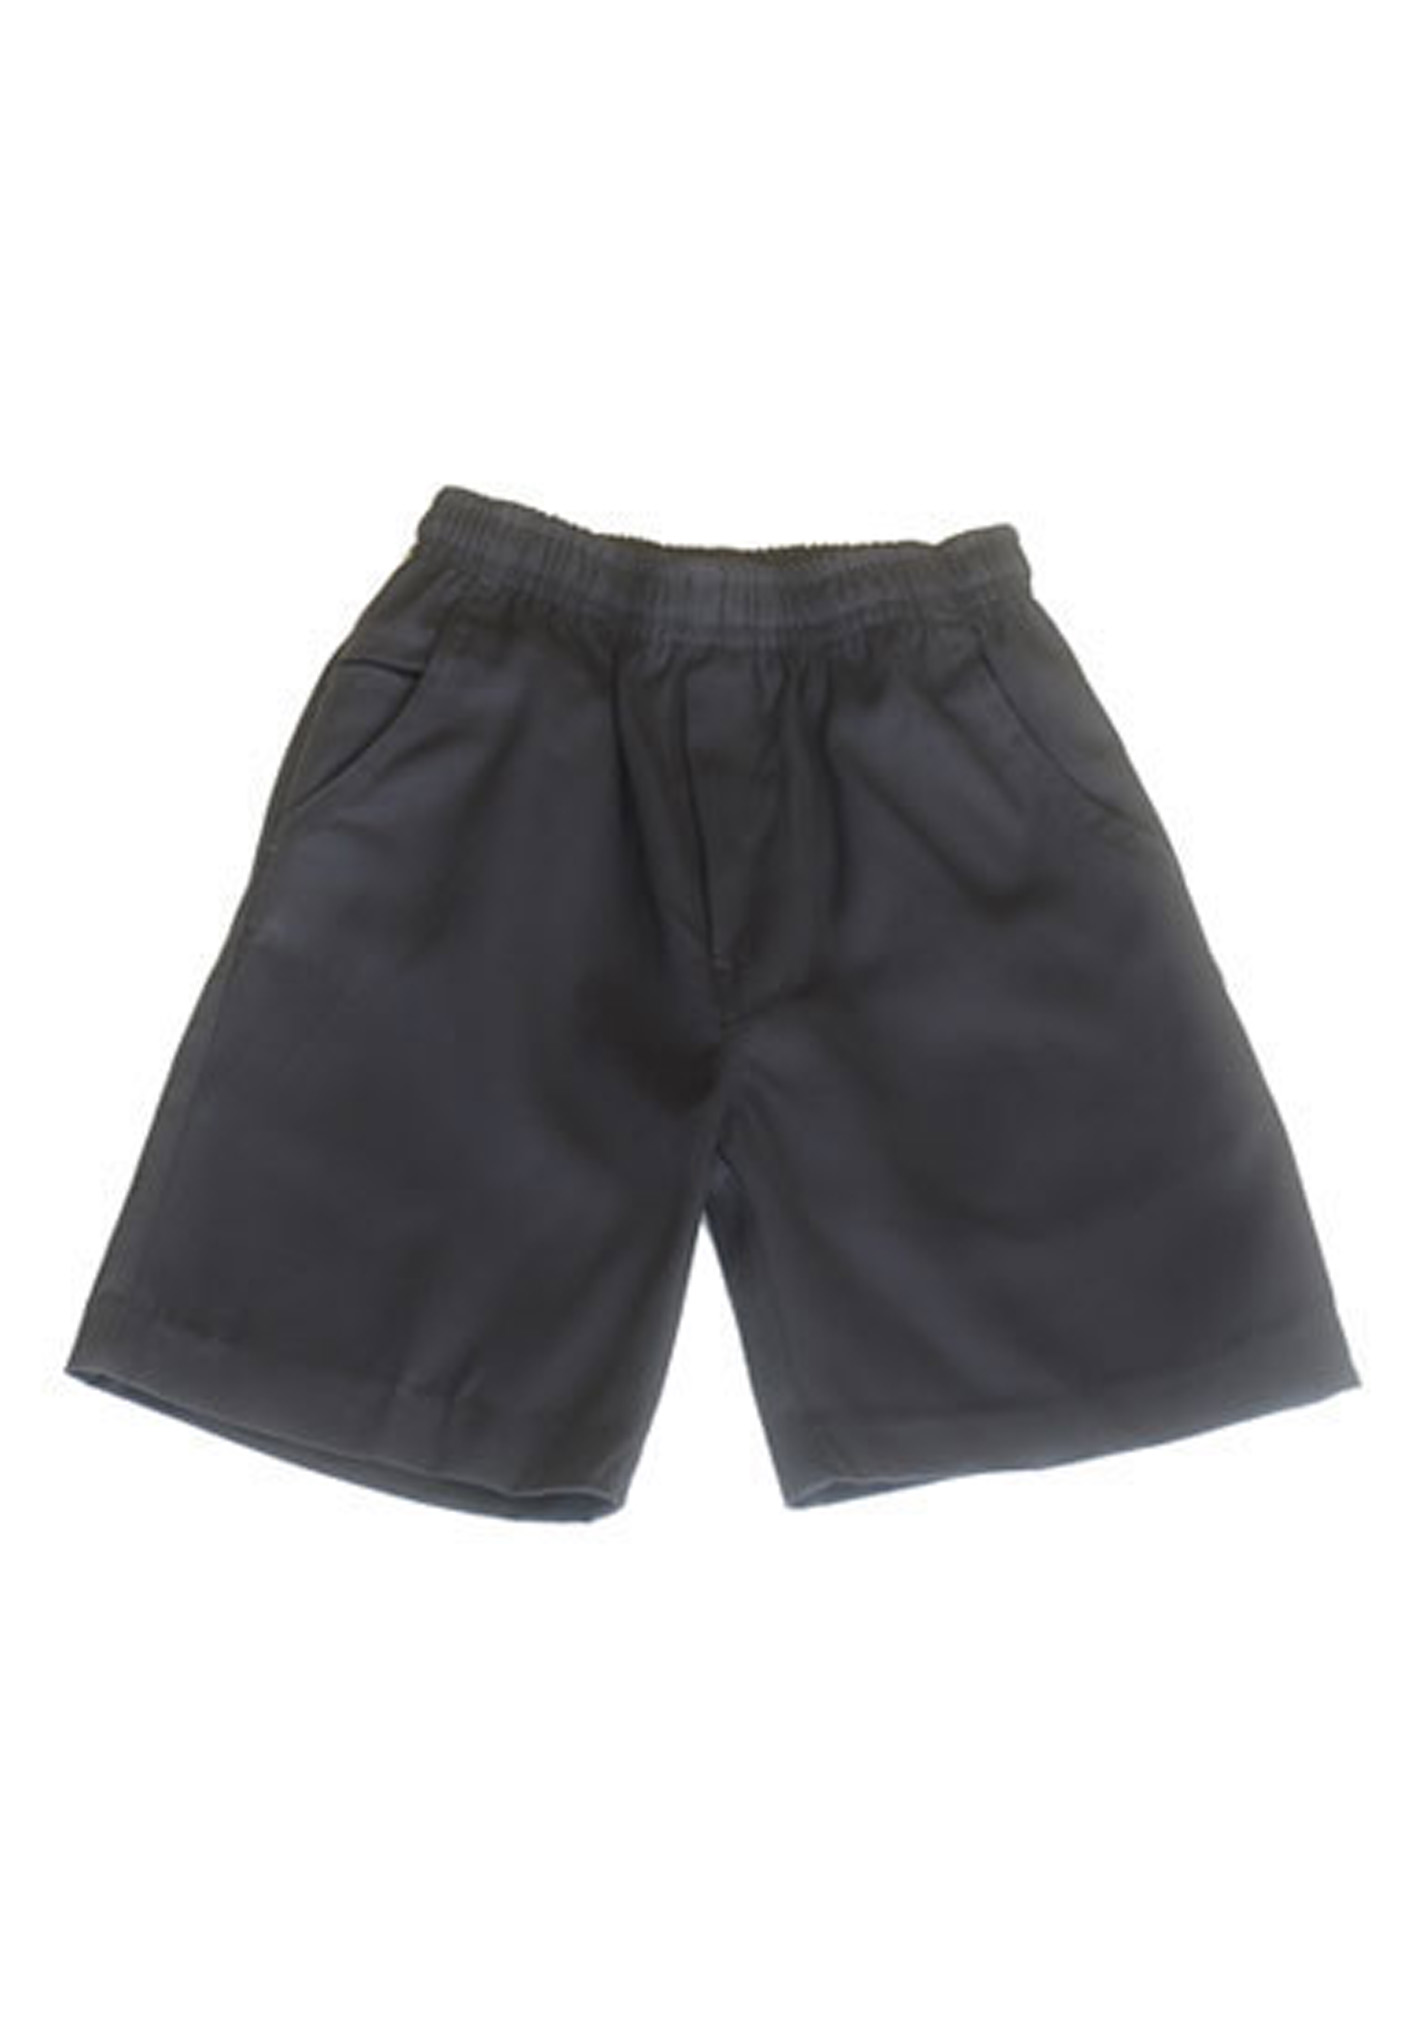 St Catherine's Boys Elastic Waist Shorts | Shop at Pickles Schoolwear ...